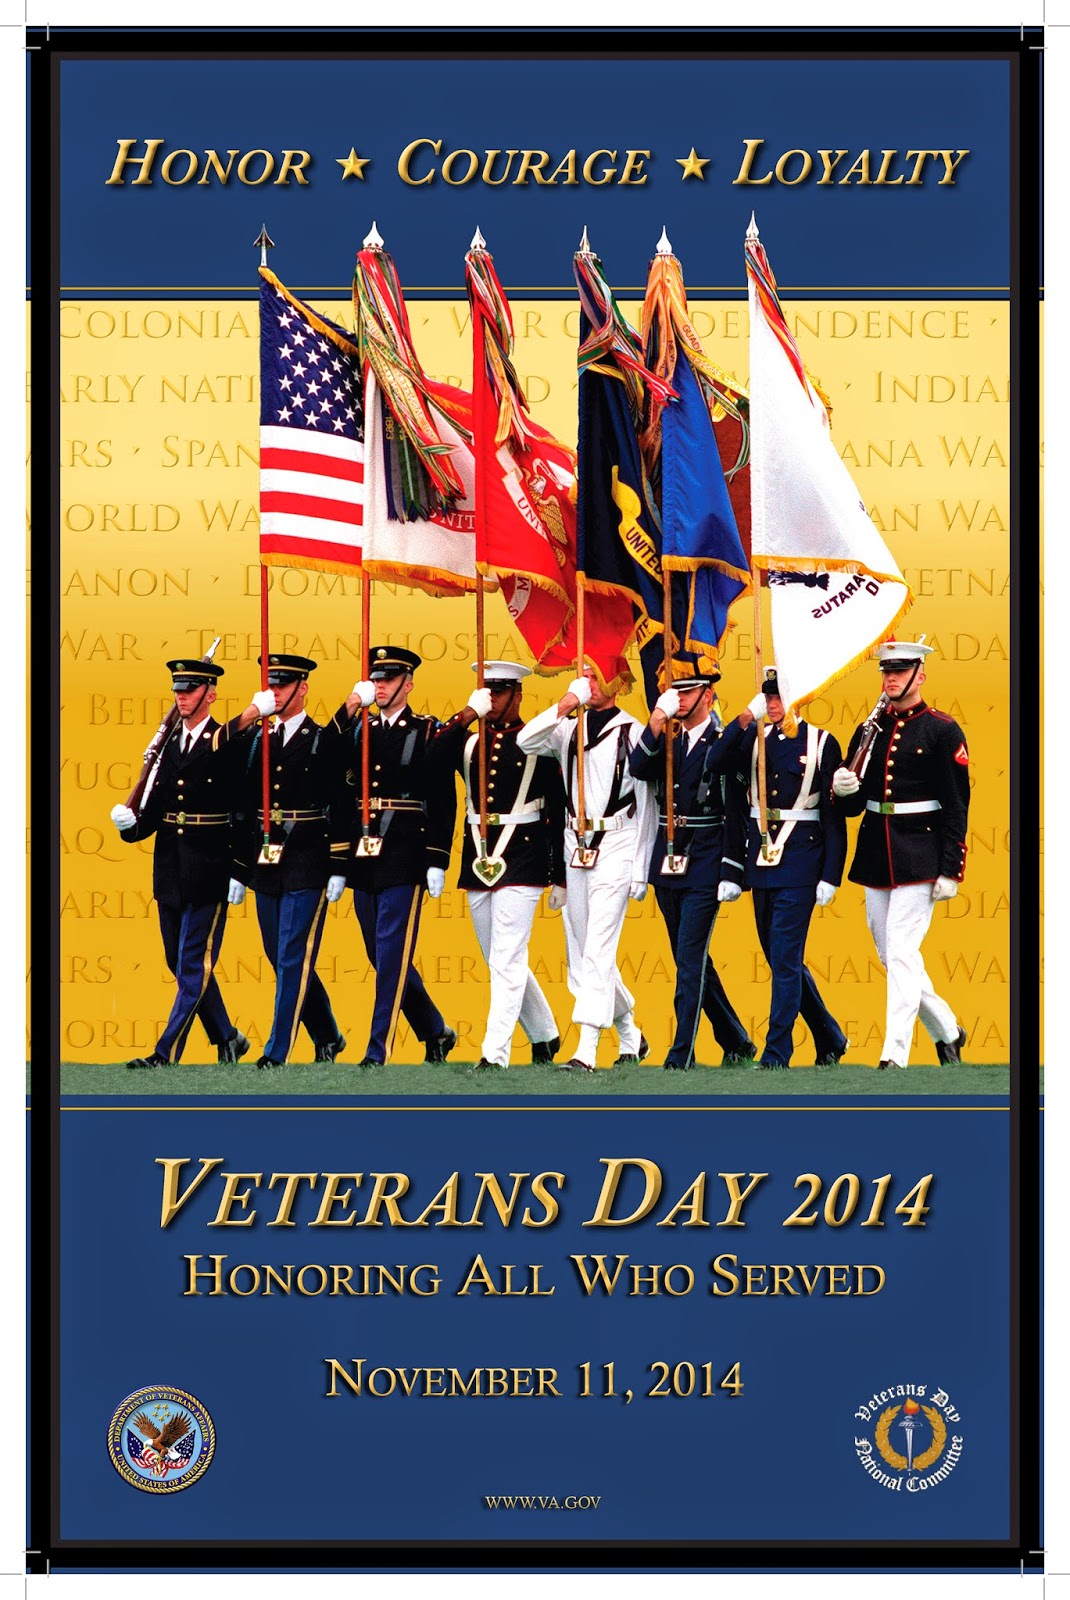 moments-of-introspection-veterans-day-poster-from-the-va